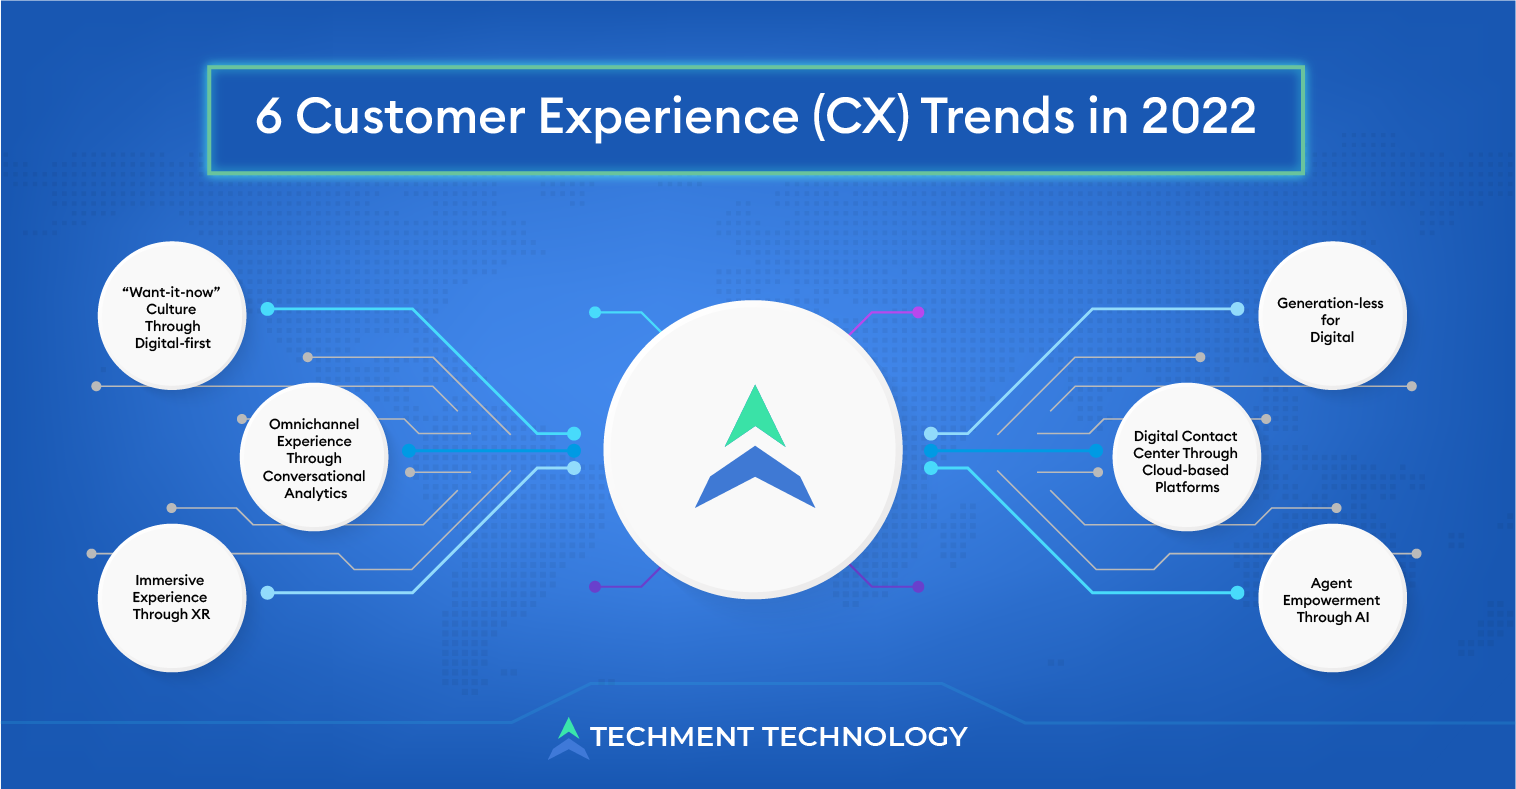 6 Customer Experience (CX) Trends in 2022 